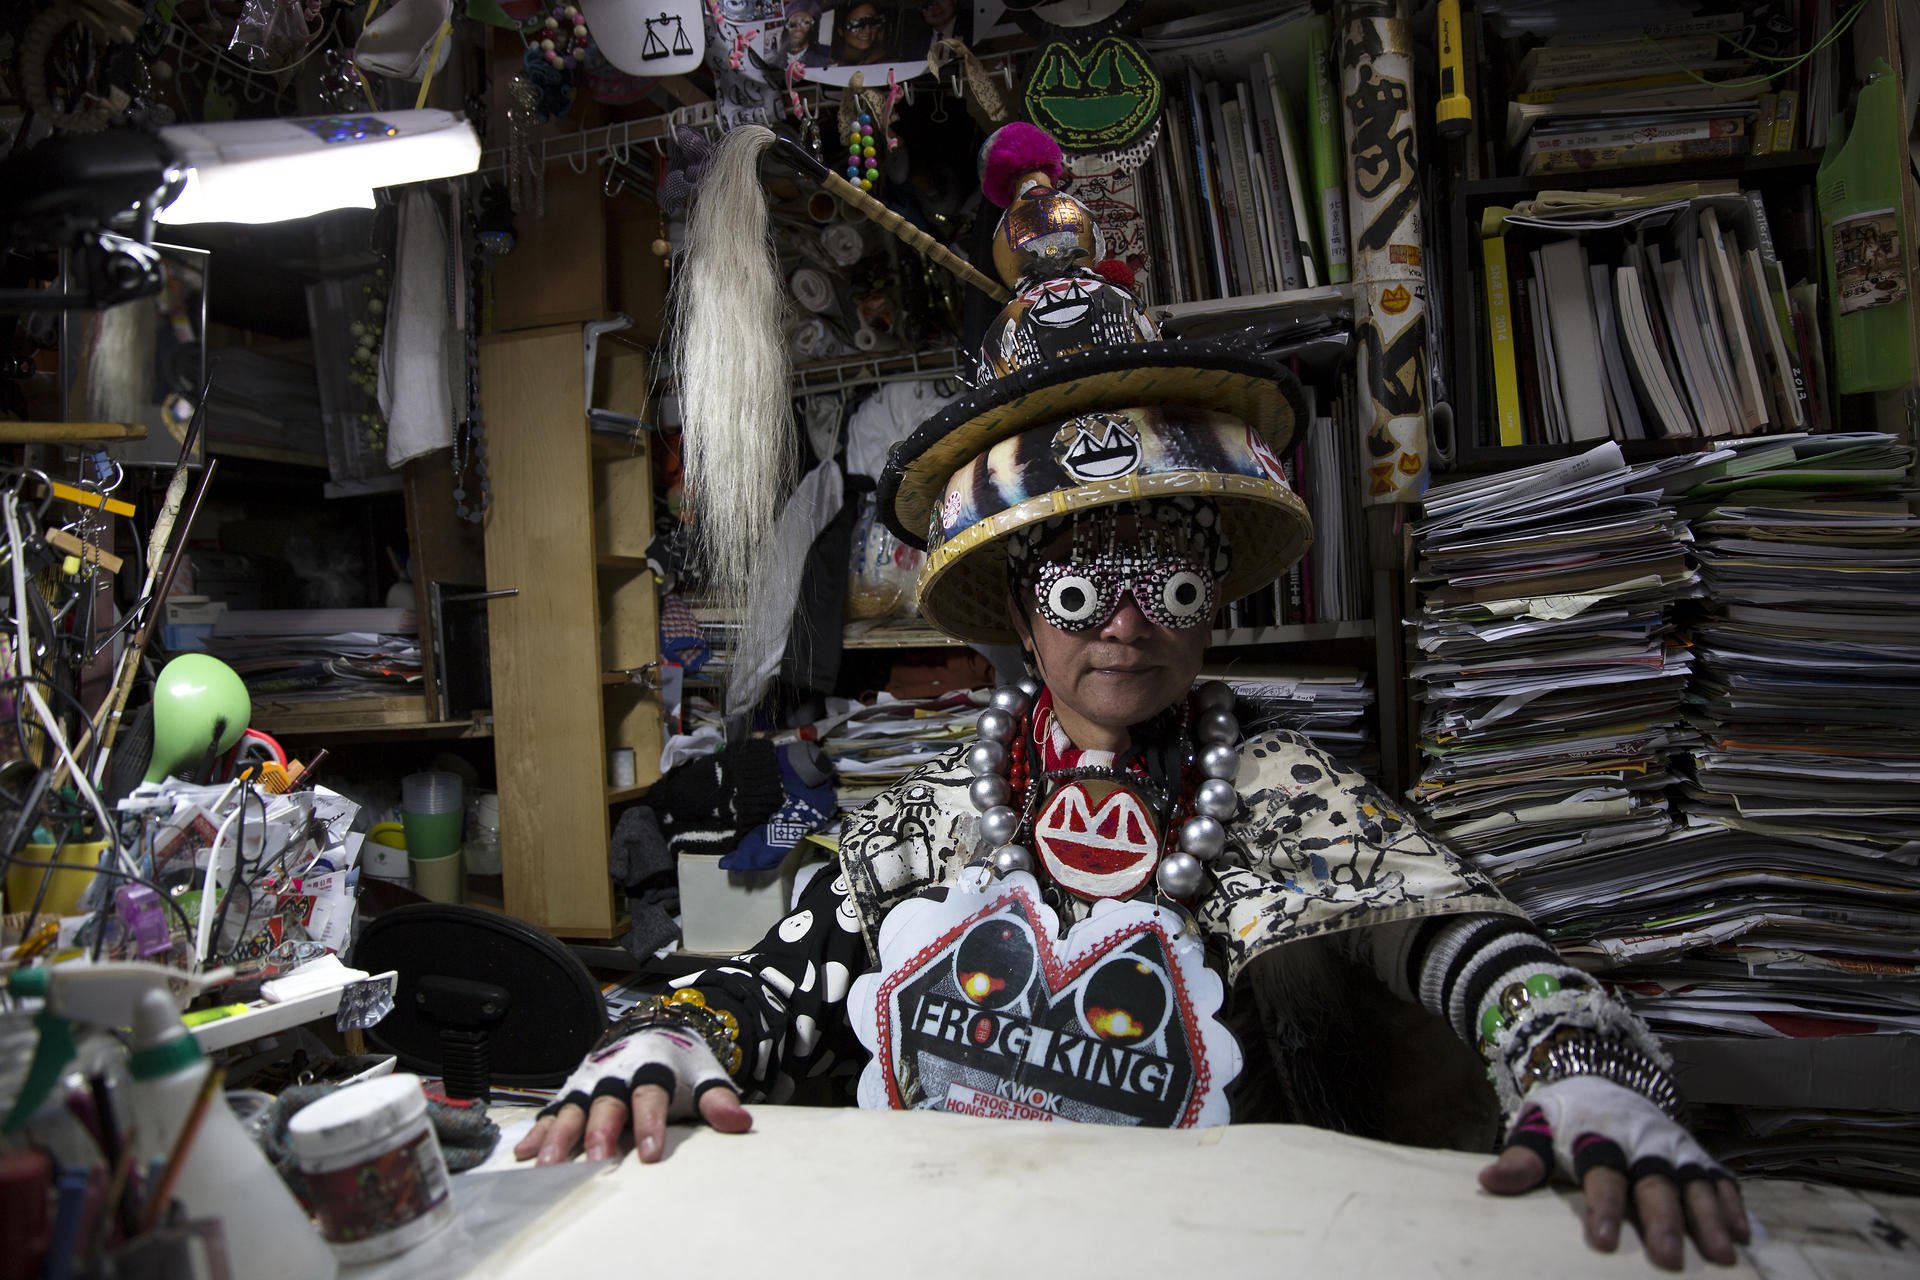 Artist Kwok Mang-ho is all dressed up for the part. Photo: Robin Fall